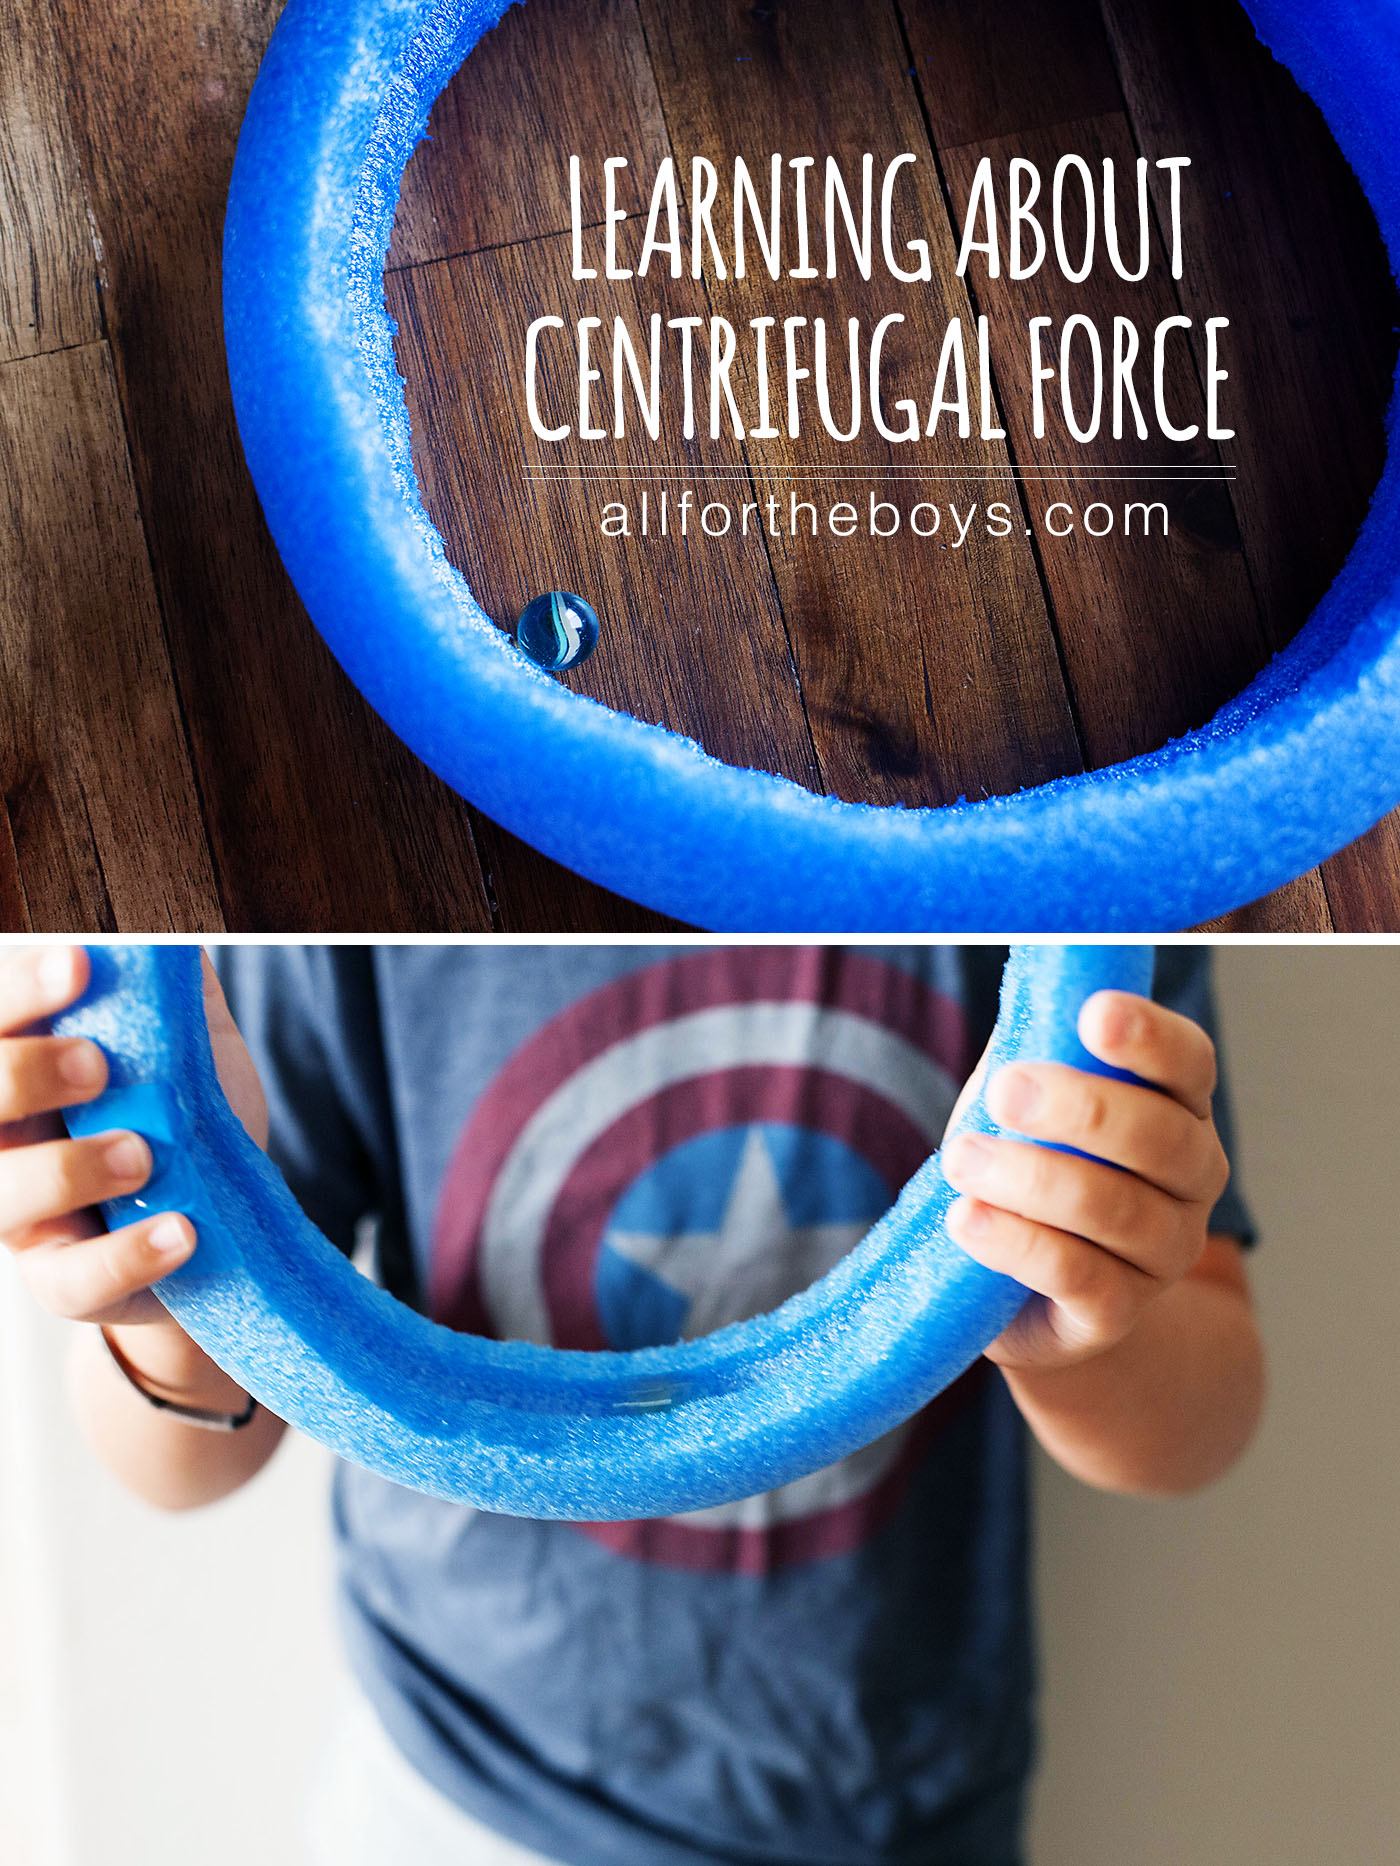 Learning about centrifugal force